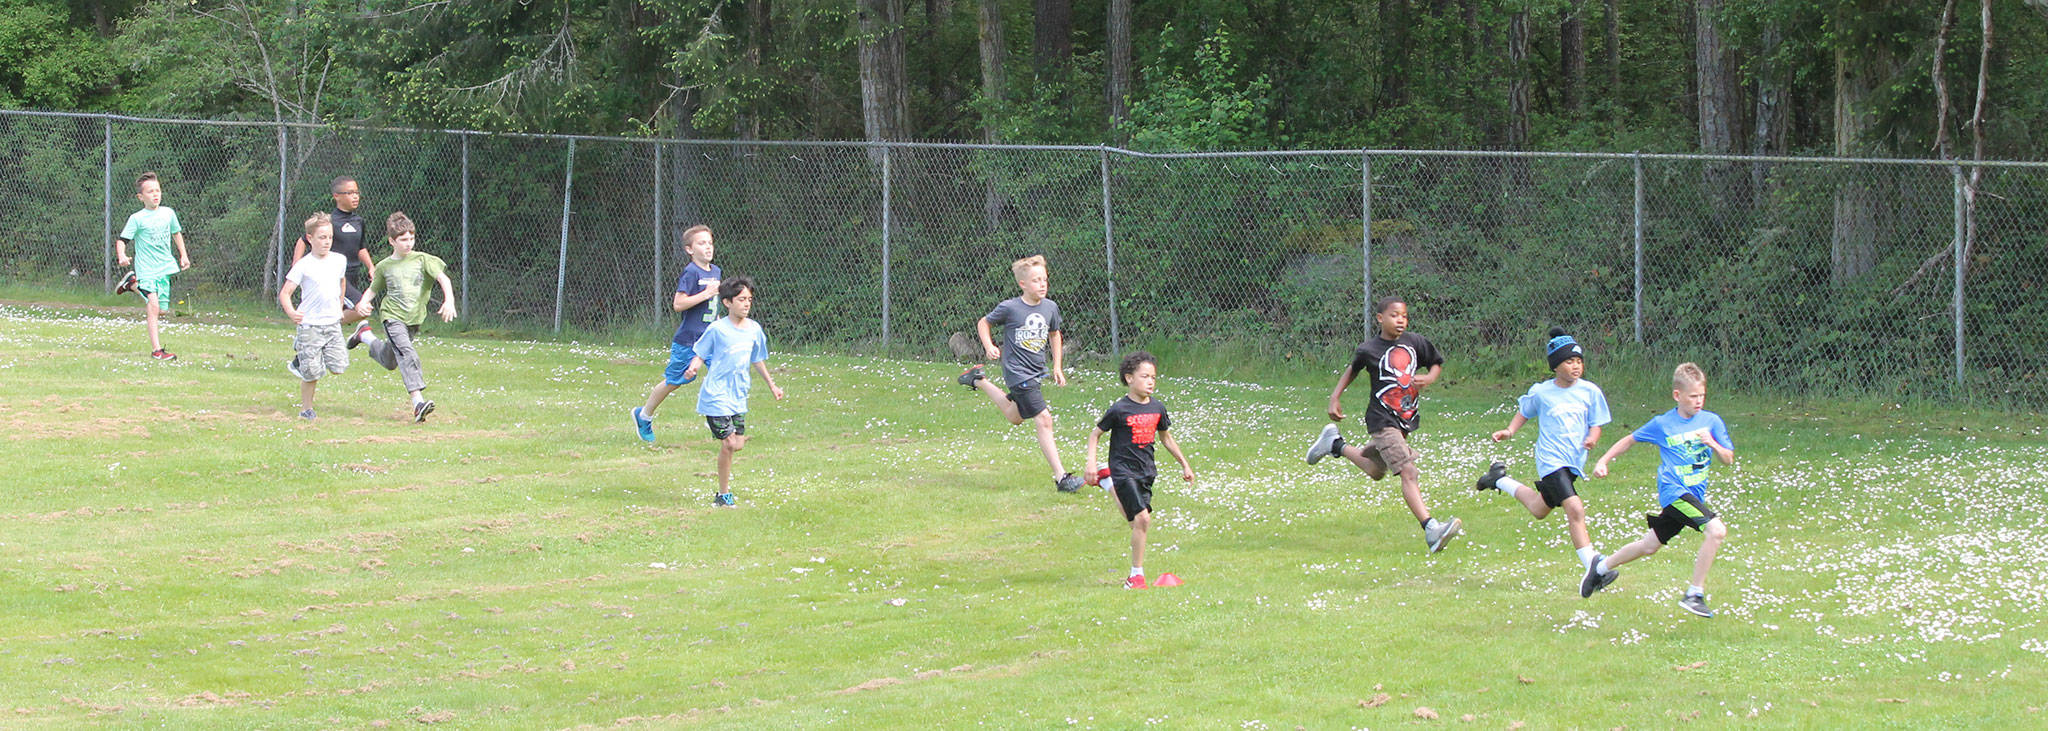 Boys stream across the field at Fort Nugent Park in an elementary school cross country meet May 17. (Photo by Jim Waller/Whidbey News-Times)